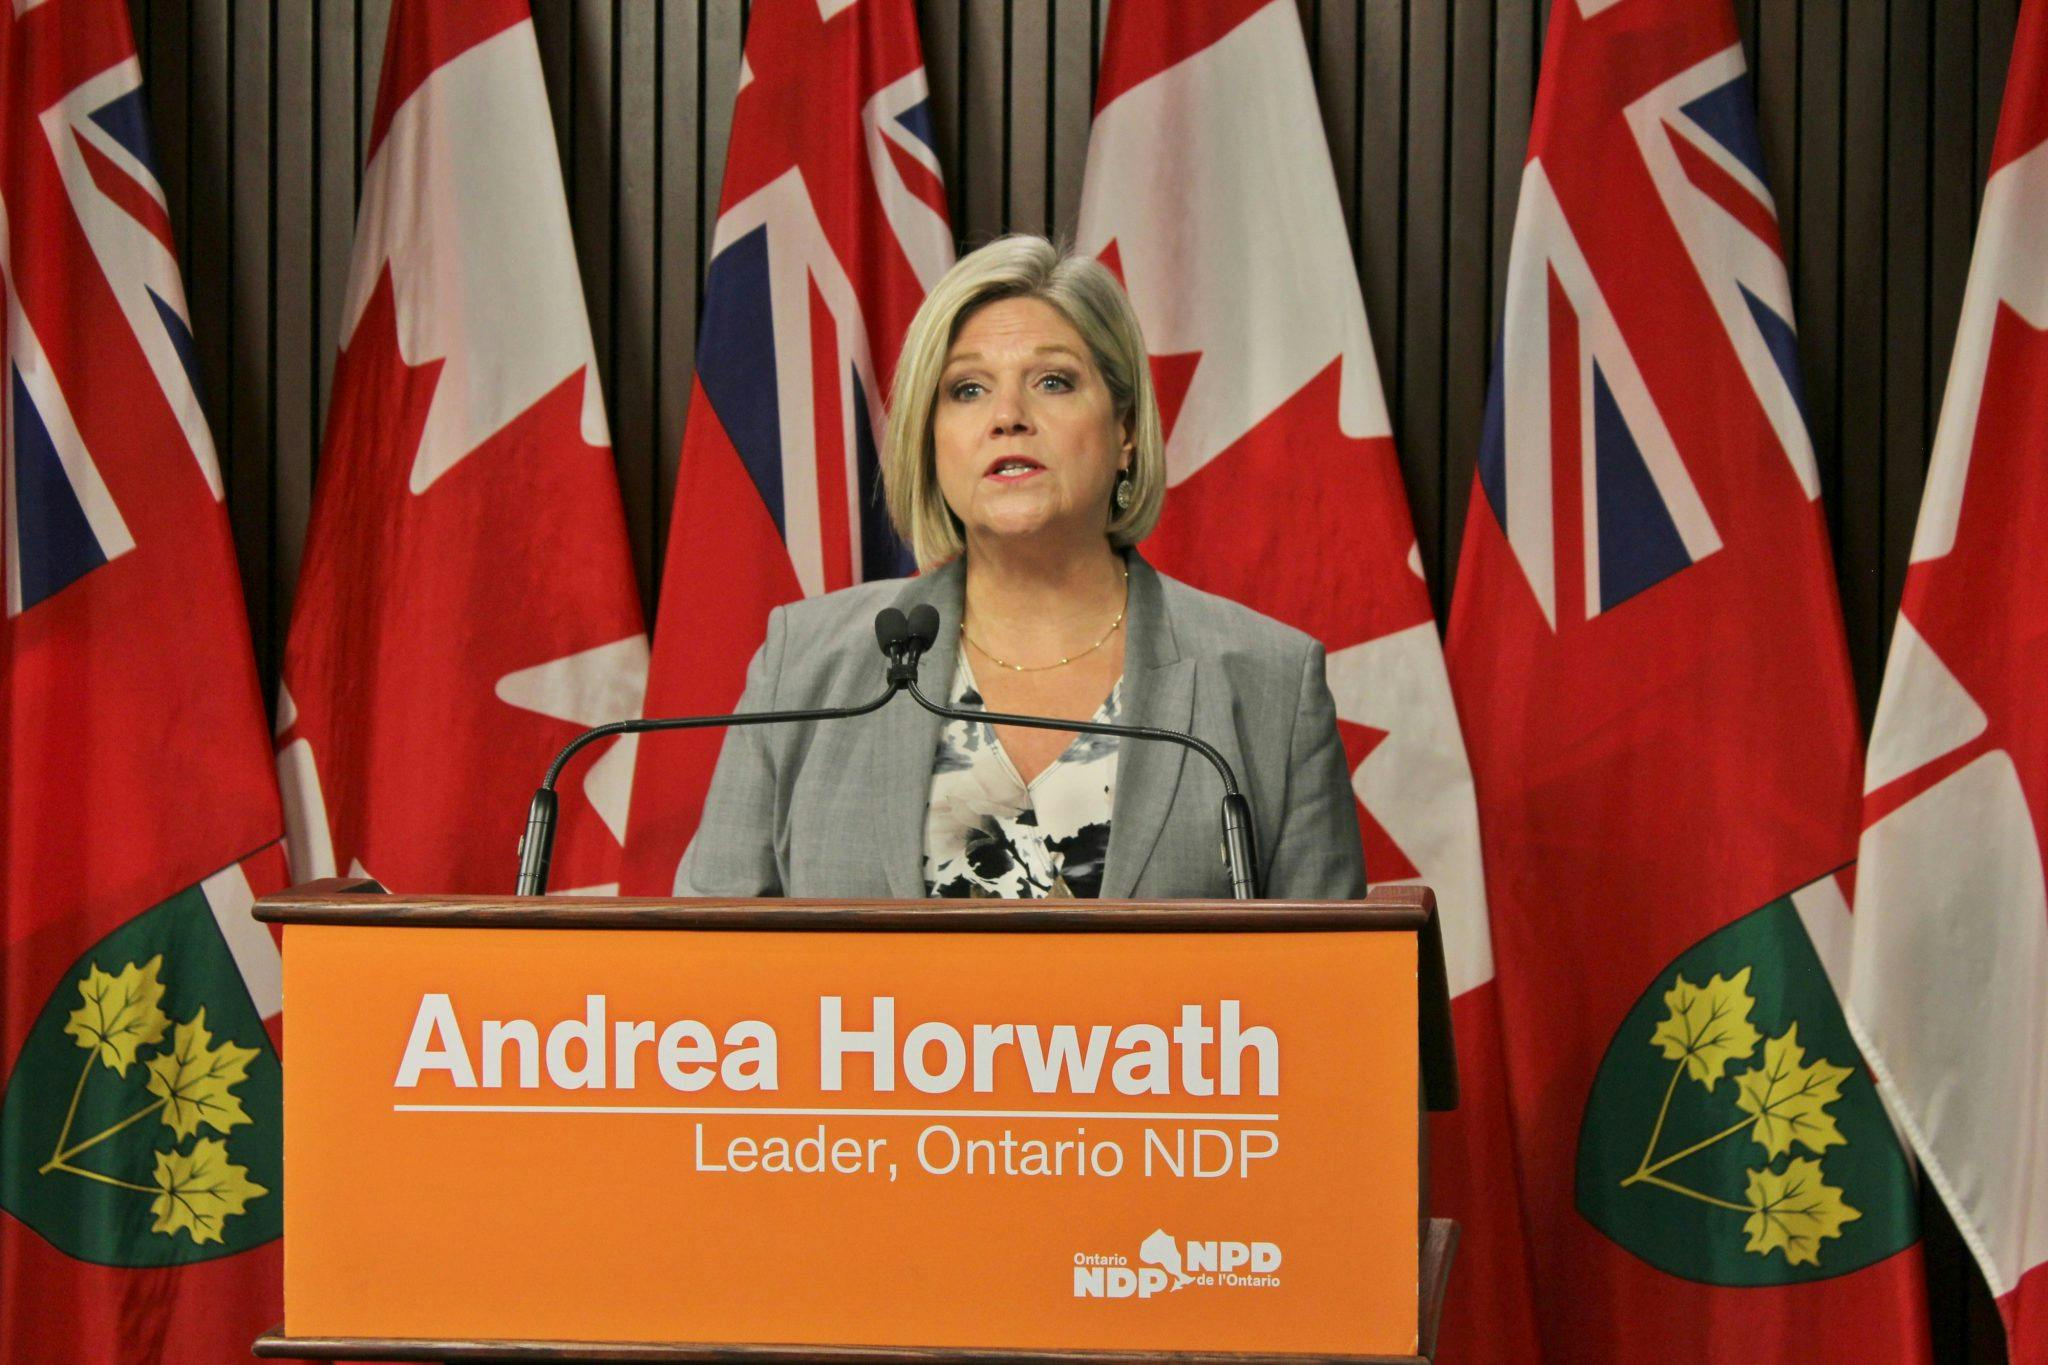 Andrea Horwath contends with conundrum of soaring PC poll numbers amid Tory turmoil